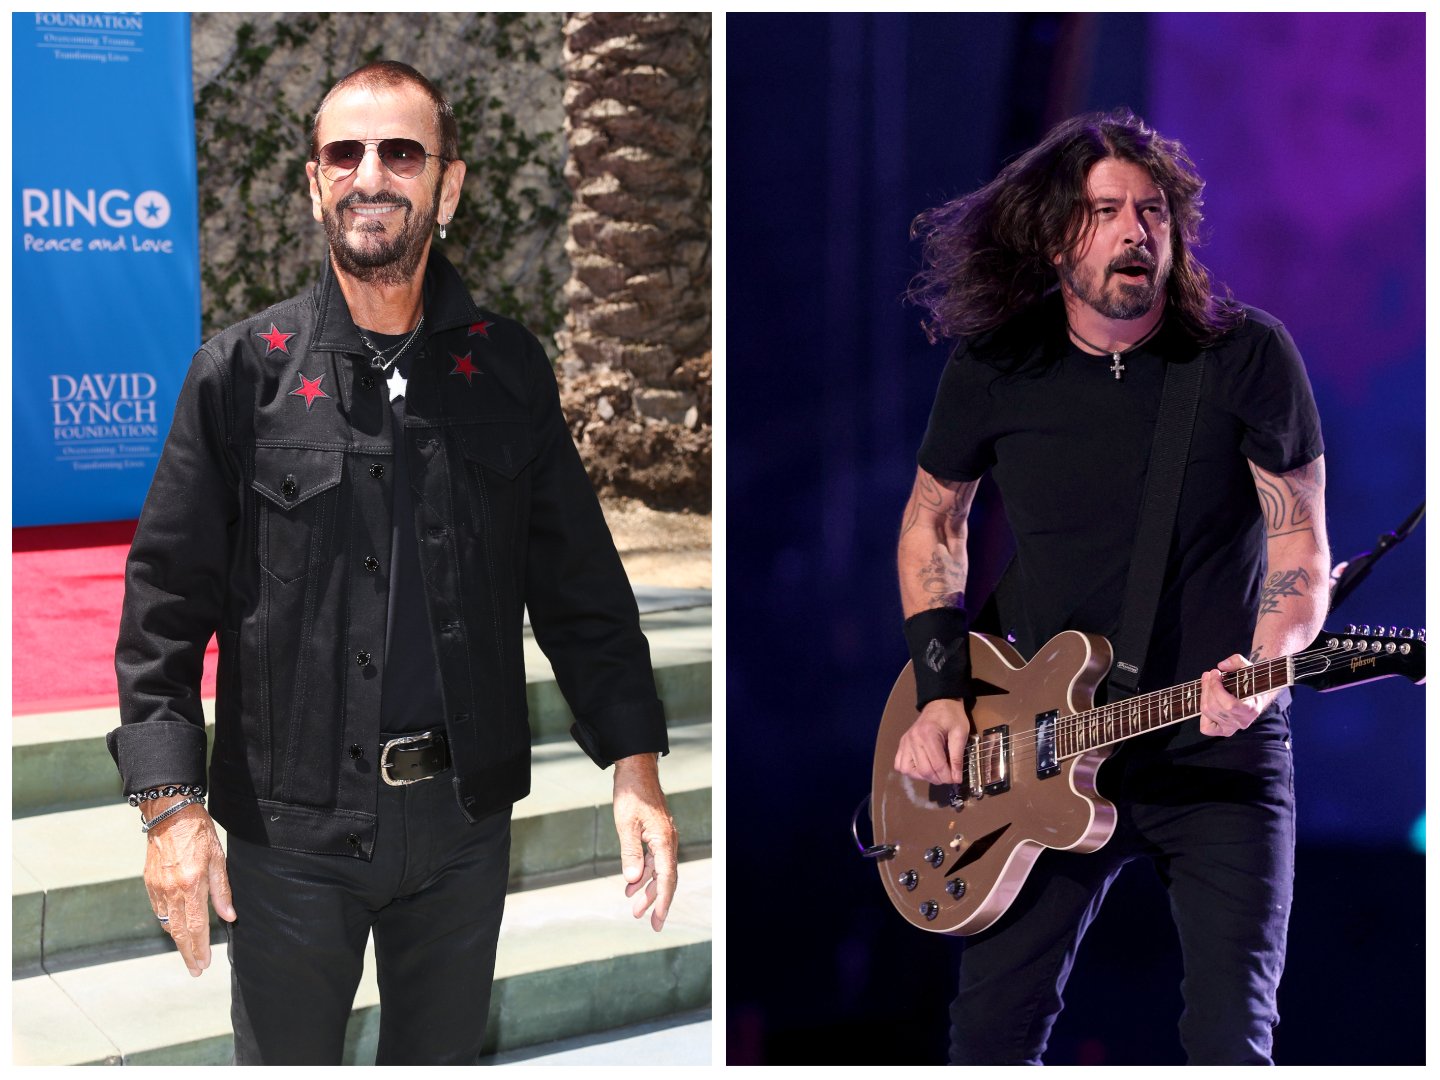 Ringo Starr wears a jacket with stars on it. Dave Grohl plays the guitar.